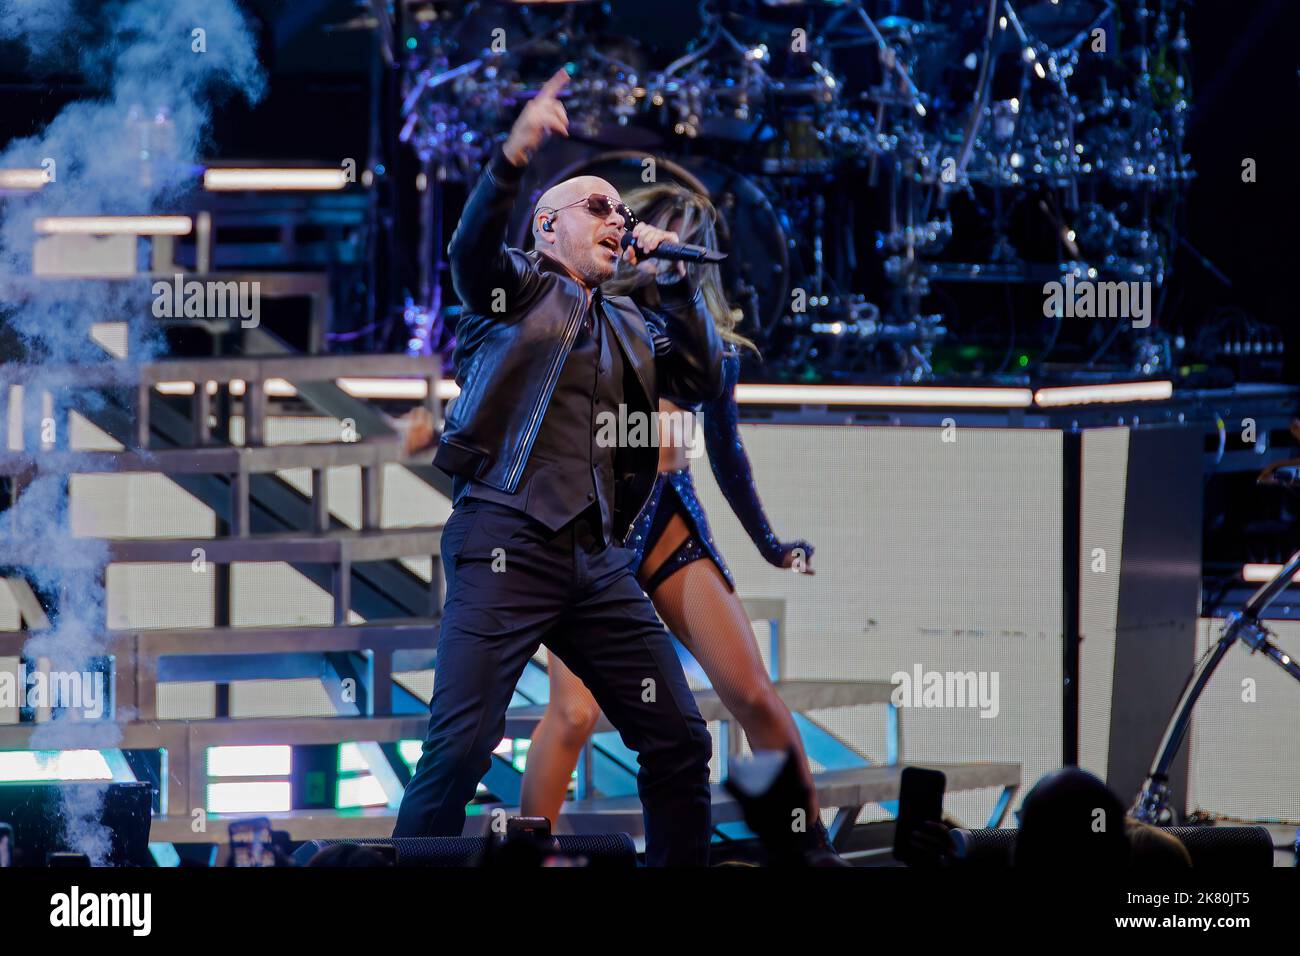 Hollywood, Florida, USA. 19th Oct, 2022. Pitbull performing on stage of CanÕt Stop US Now Summer Tour 2022 at Hard Rock Live, Flo. Pitbull invites disruption on a global scale as a Grammy-winning independent international superstar, education advocate, business entrepreneur and motivational speaker. Credit: Yaroslav Sabitov/YES Market Media/Alamy Live News Stock Photo